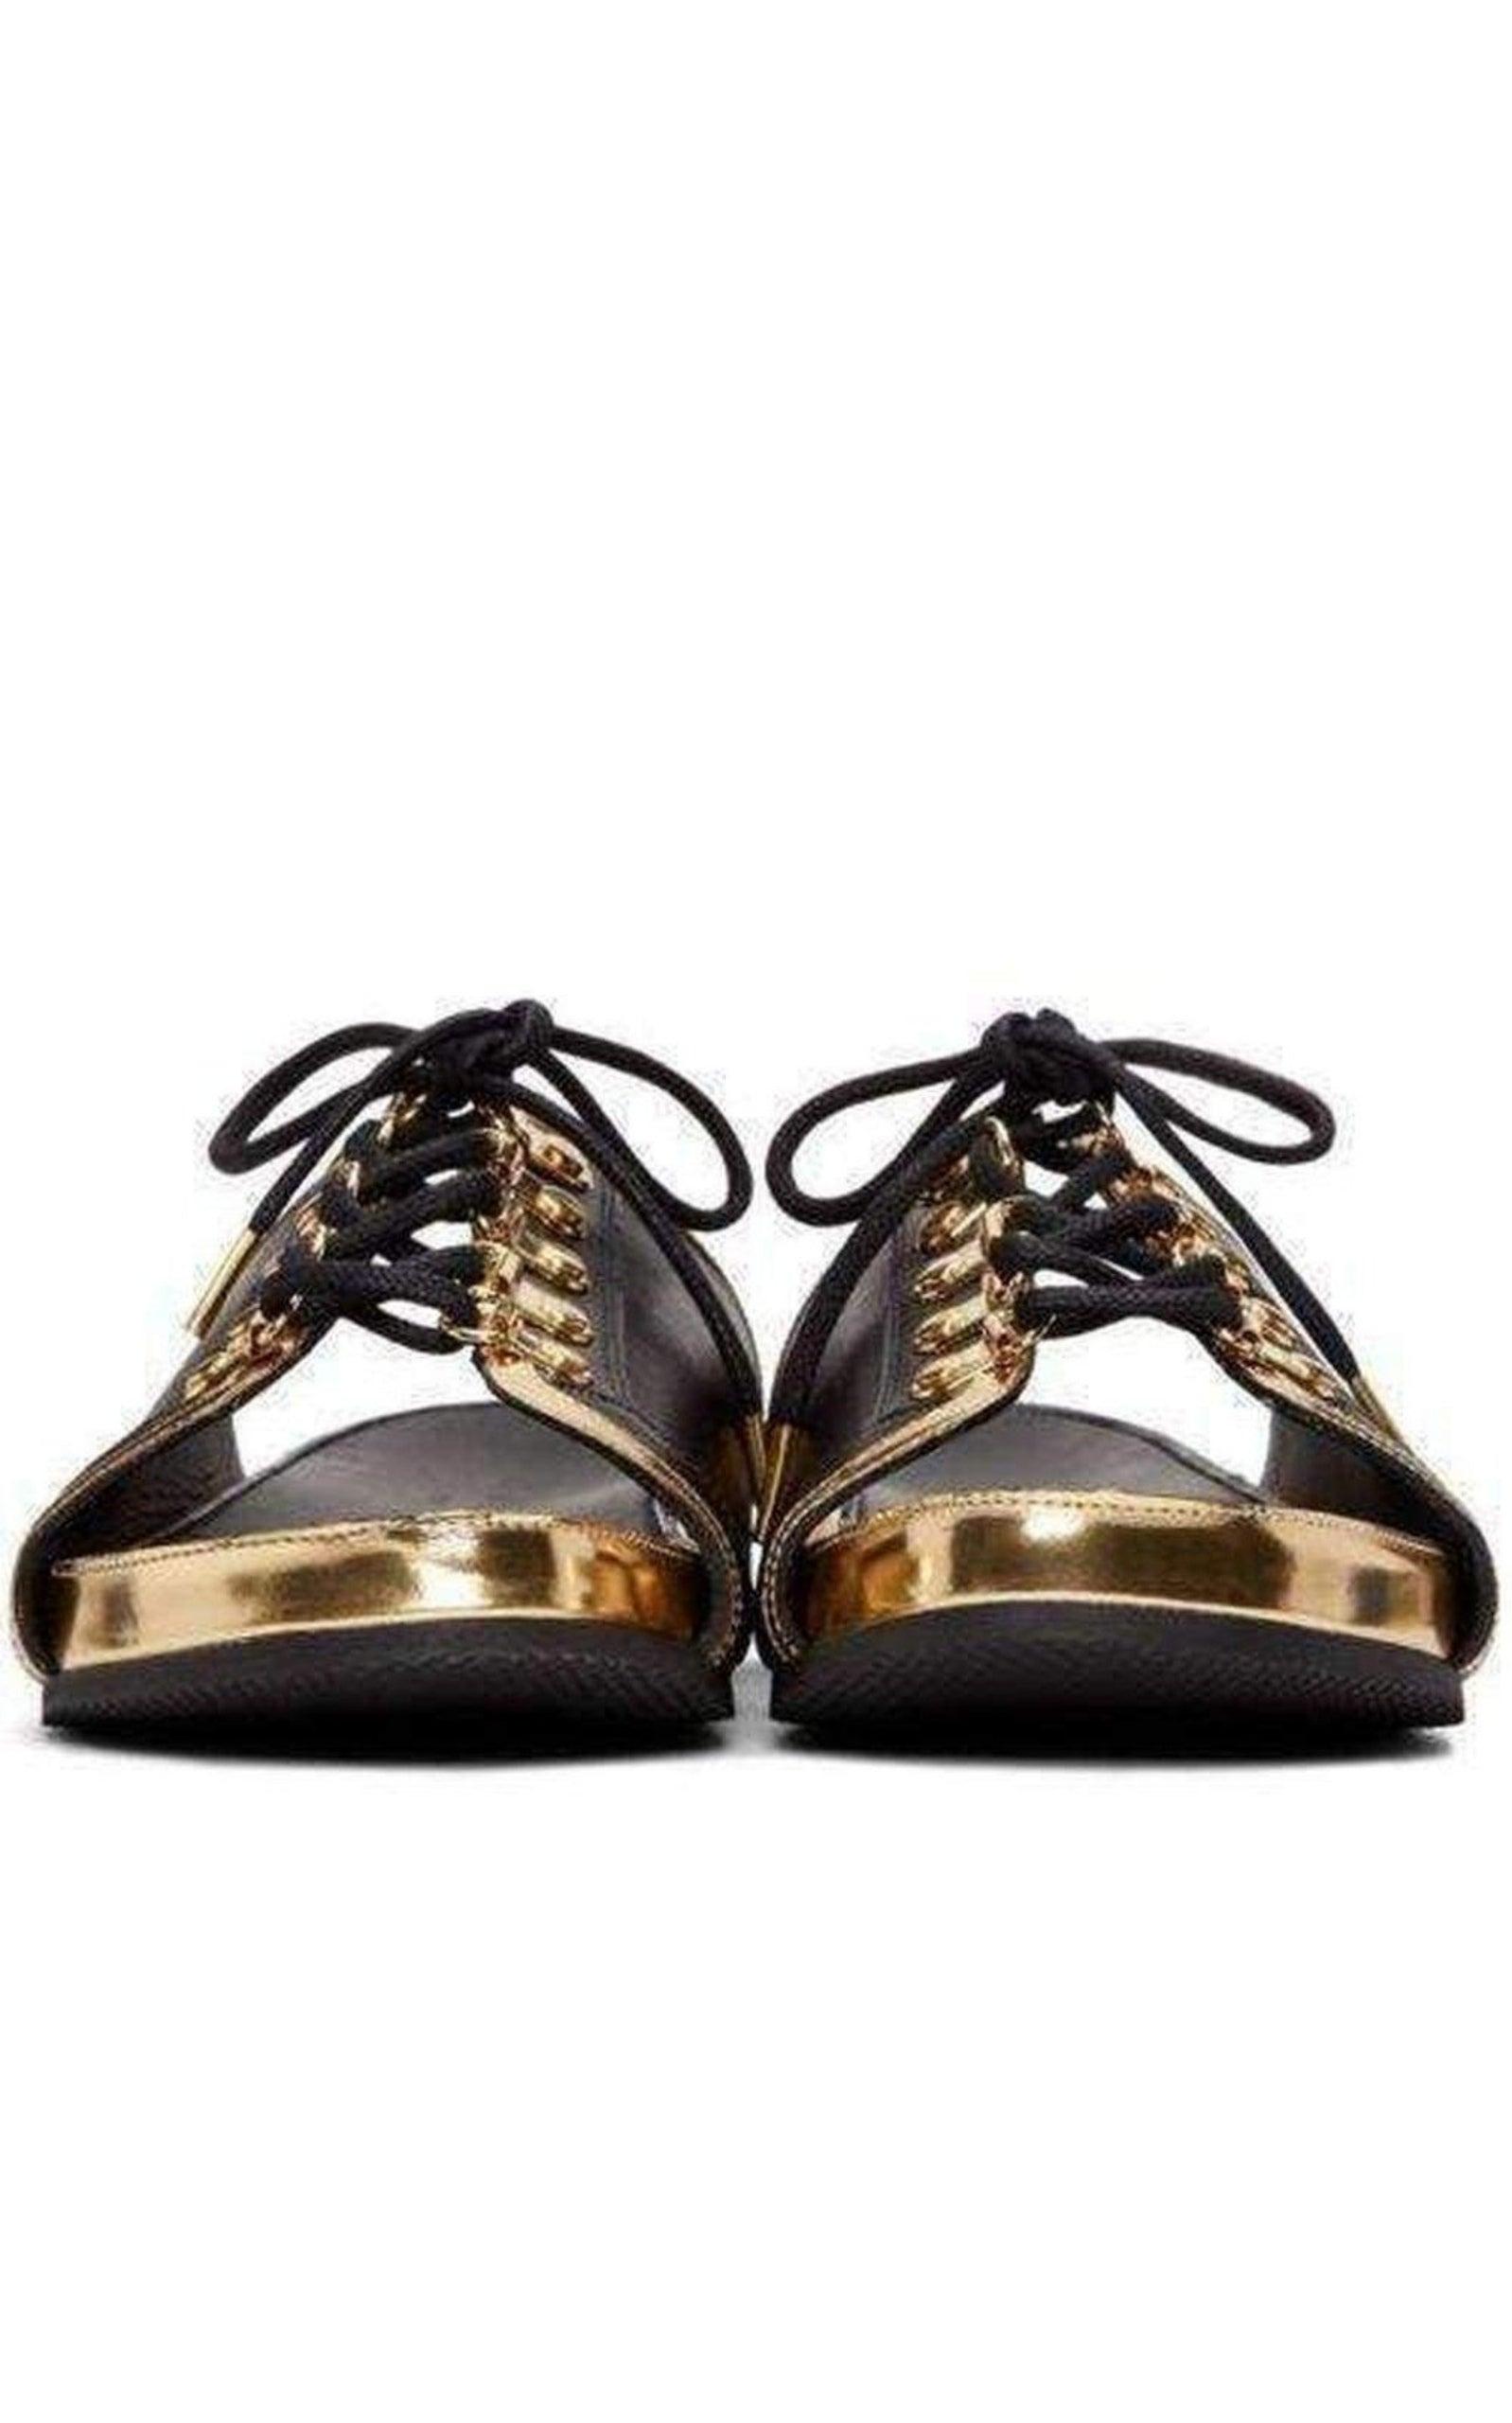 Balmain Gold Lace Up Sliders Leather Sandals in Black for Men | Lyst